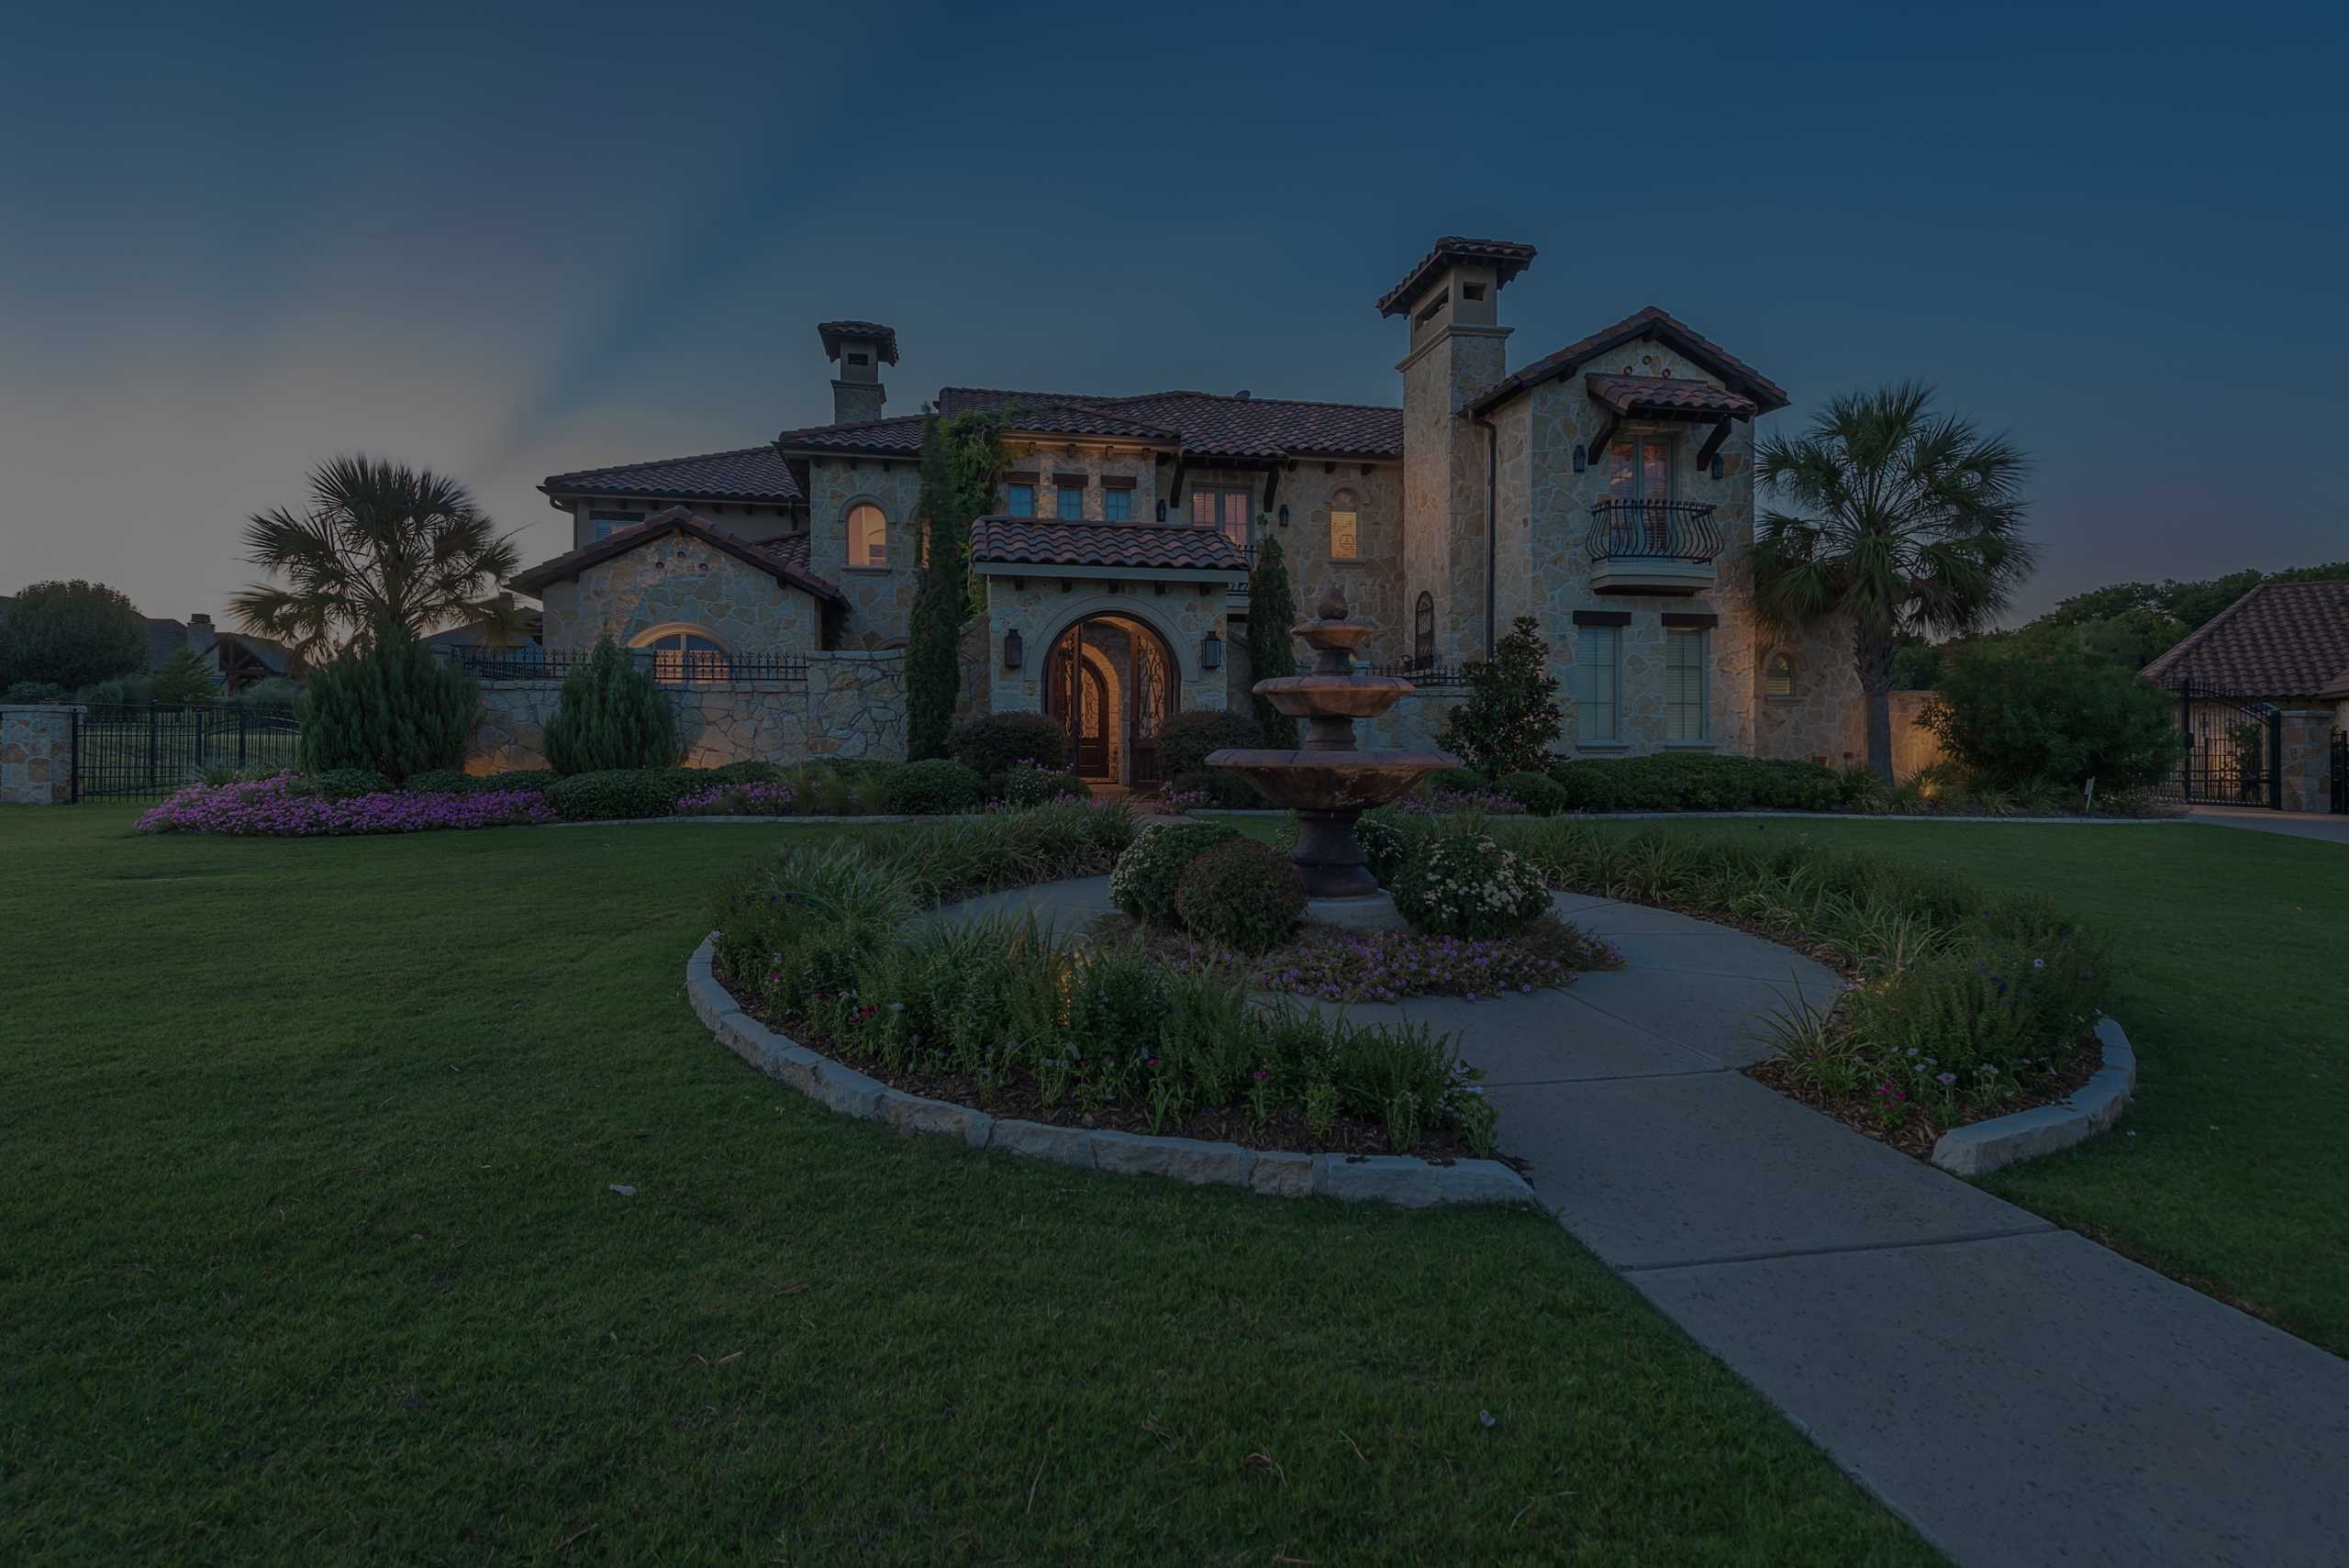 For sale in Texas, a stately Mediterranean luxury home with Louis Vuitton  branded bedroom - Luxurylaunches